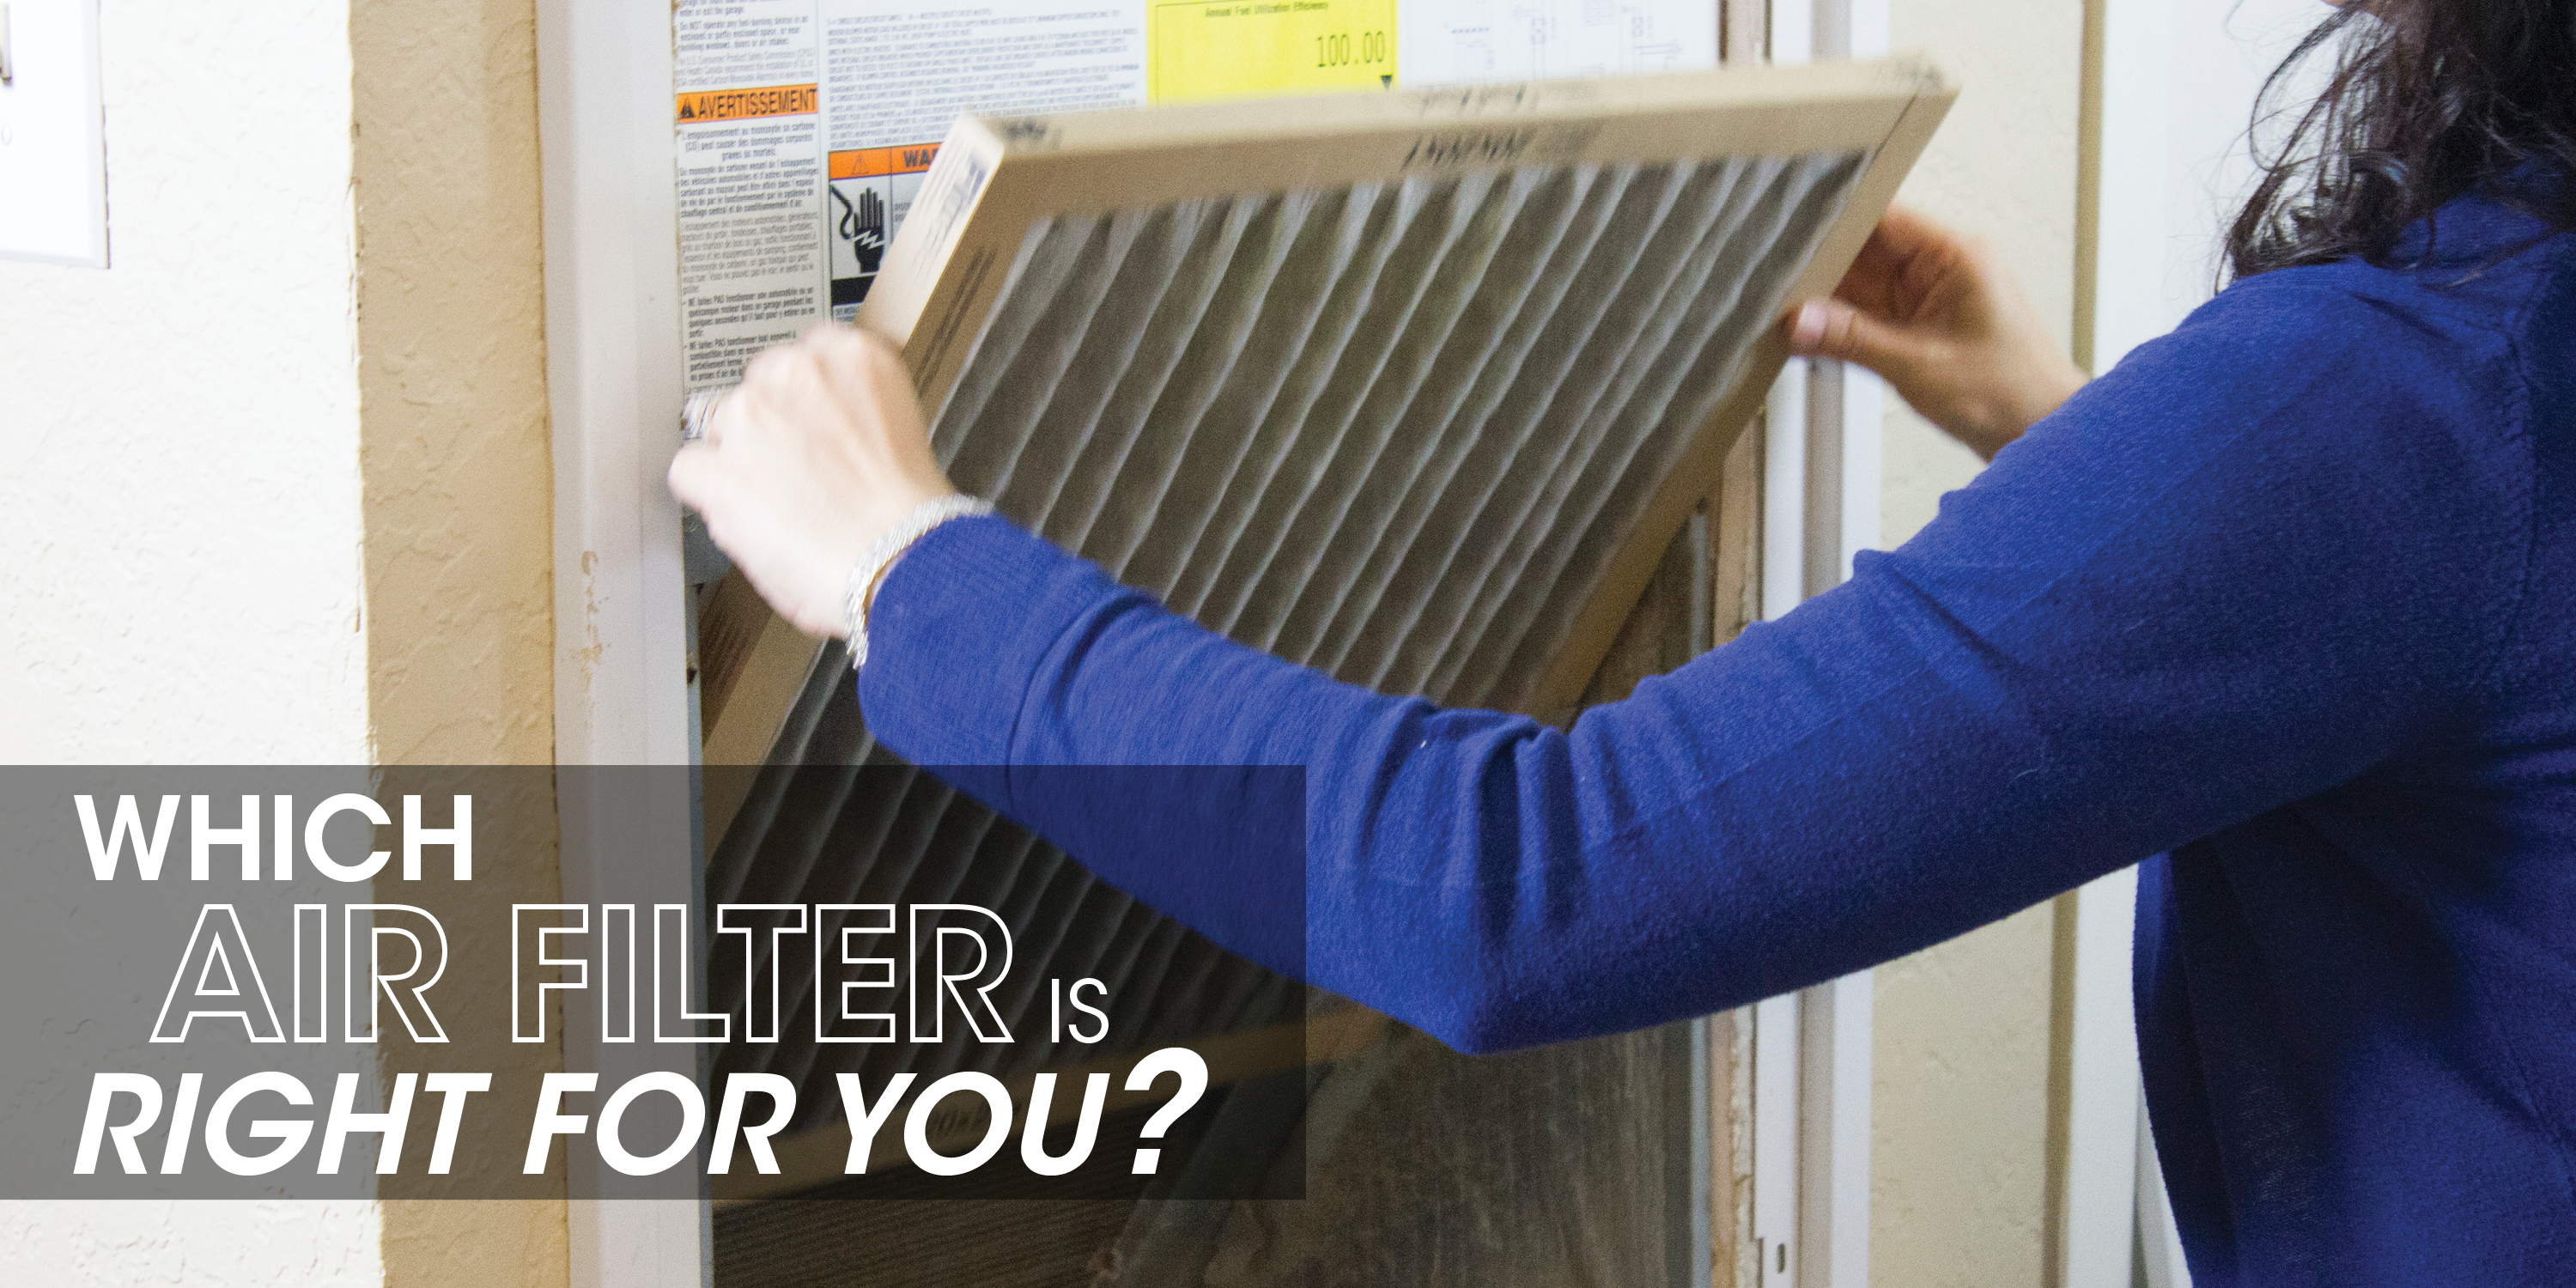 Woman changing air filter with text: "which air filter is right for you?"